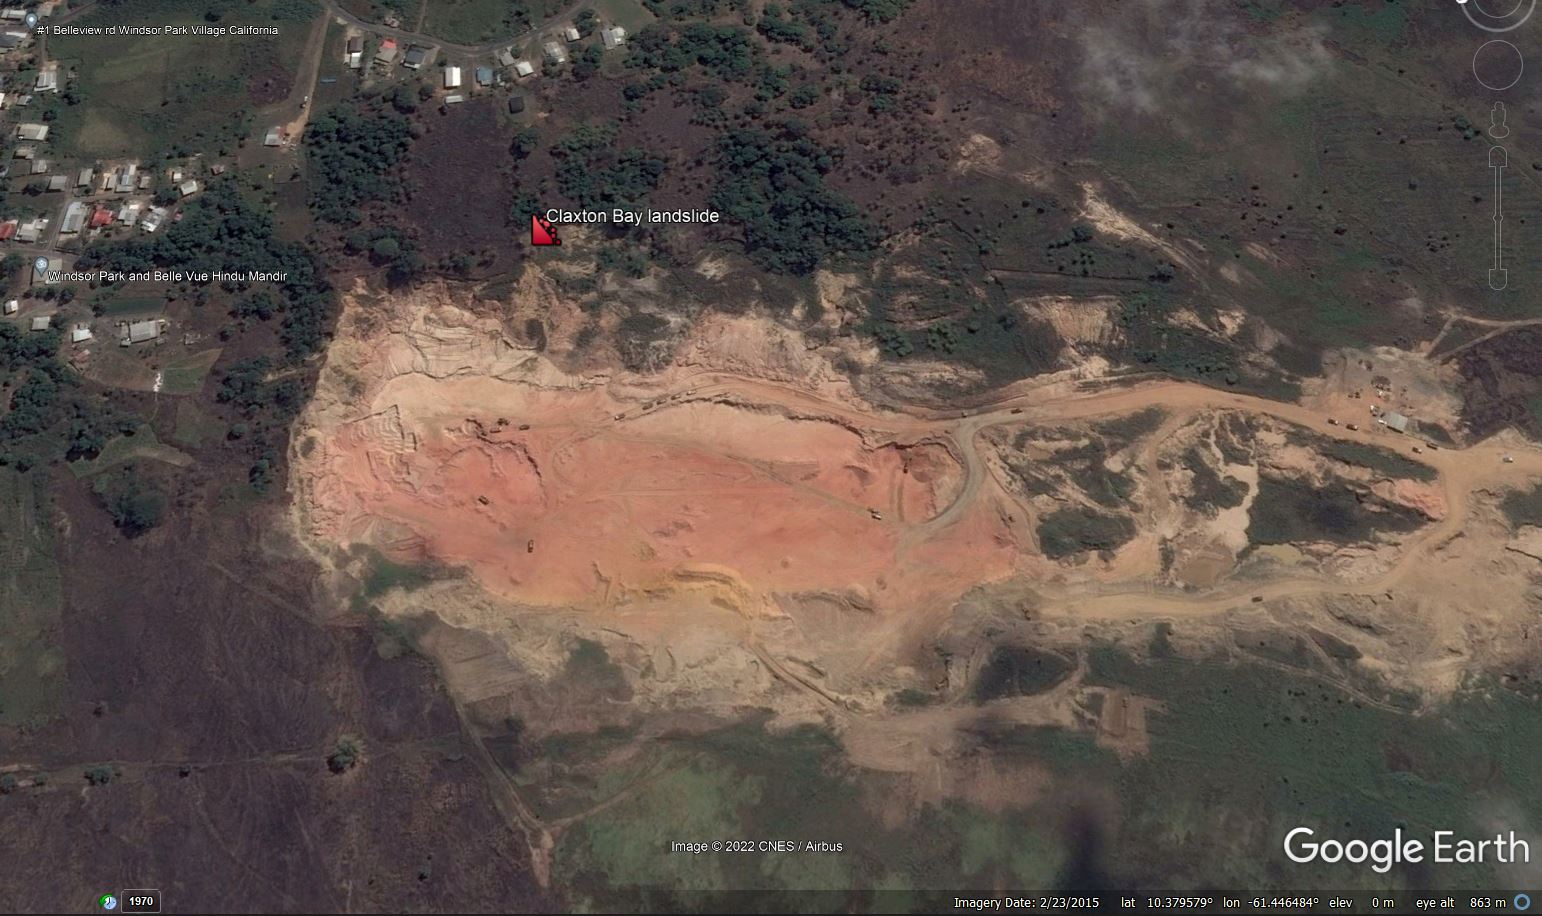 Google Earth image of the site of the Claxton Bay landslide in Trinidad, collected in February 2015, before the landslide retrogressed to affect the houses.